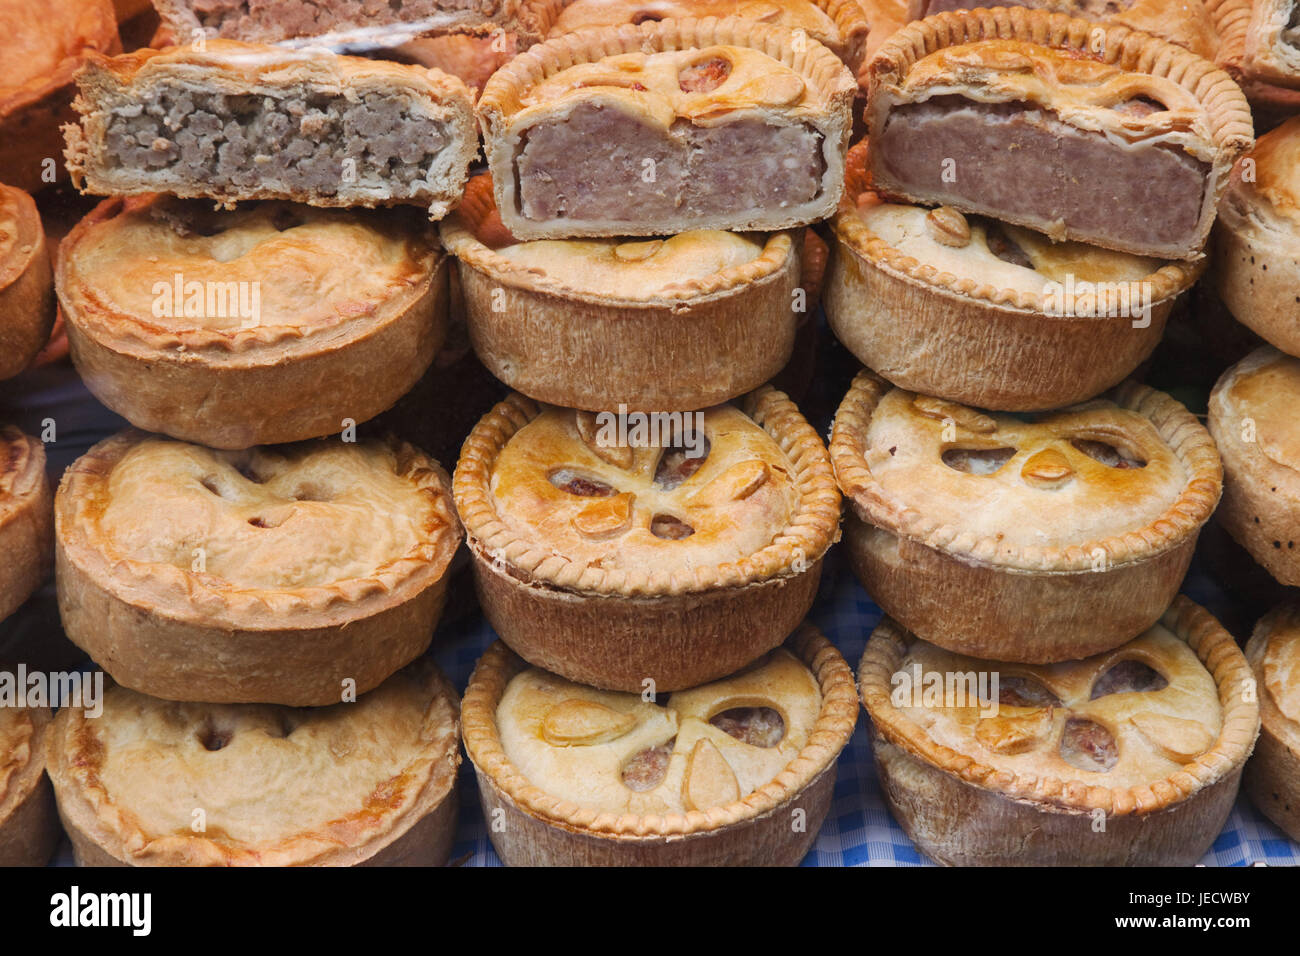 England, London, Southwark, borough Market, food state, game Boar Meat Pies, town, food market, Meat Pie, wild boar, medium close-up, Stock Photo